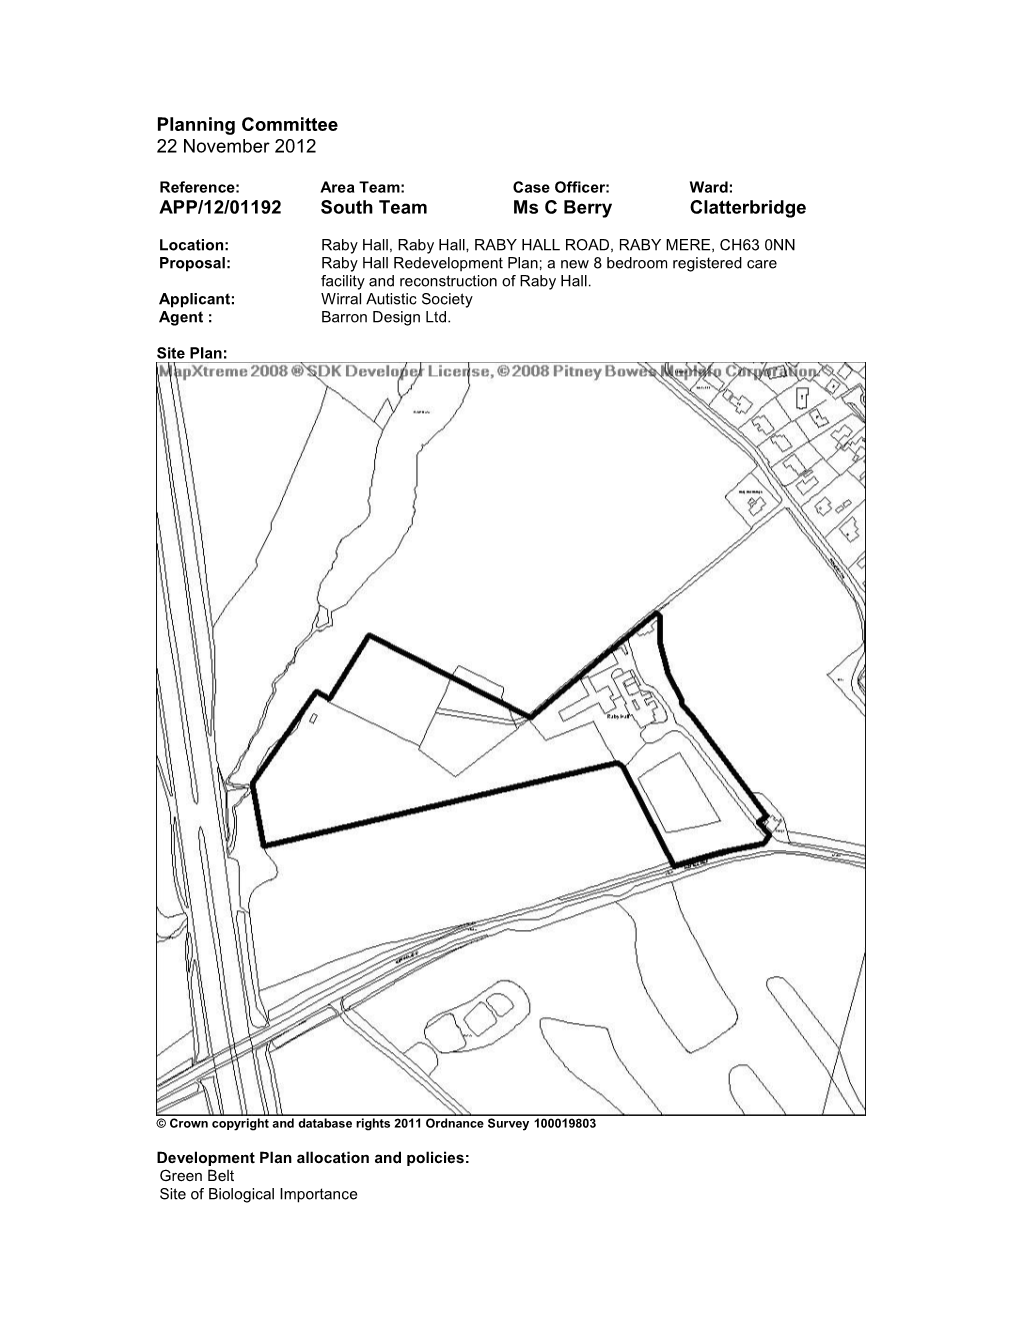 Raby Hall, RABY HALL ROAD, RABY MERE, CH63 0NN Proposal: Raby Hall Redevelopment Plan; a New 8 Bedroom Registered Care Facility and Reconstruction of Raby Hall